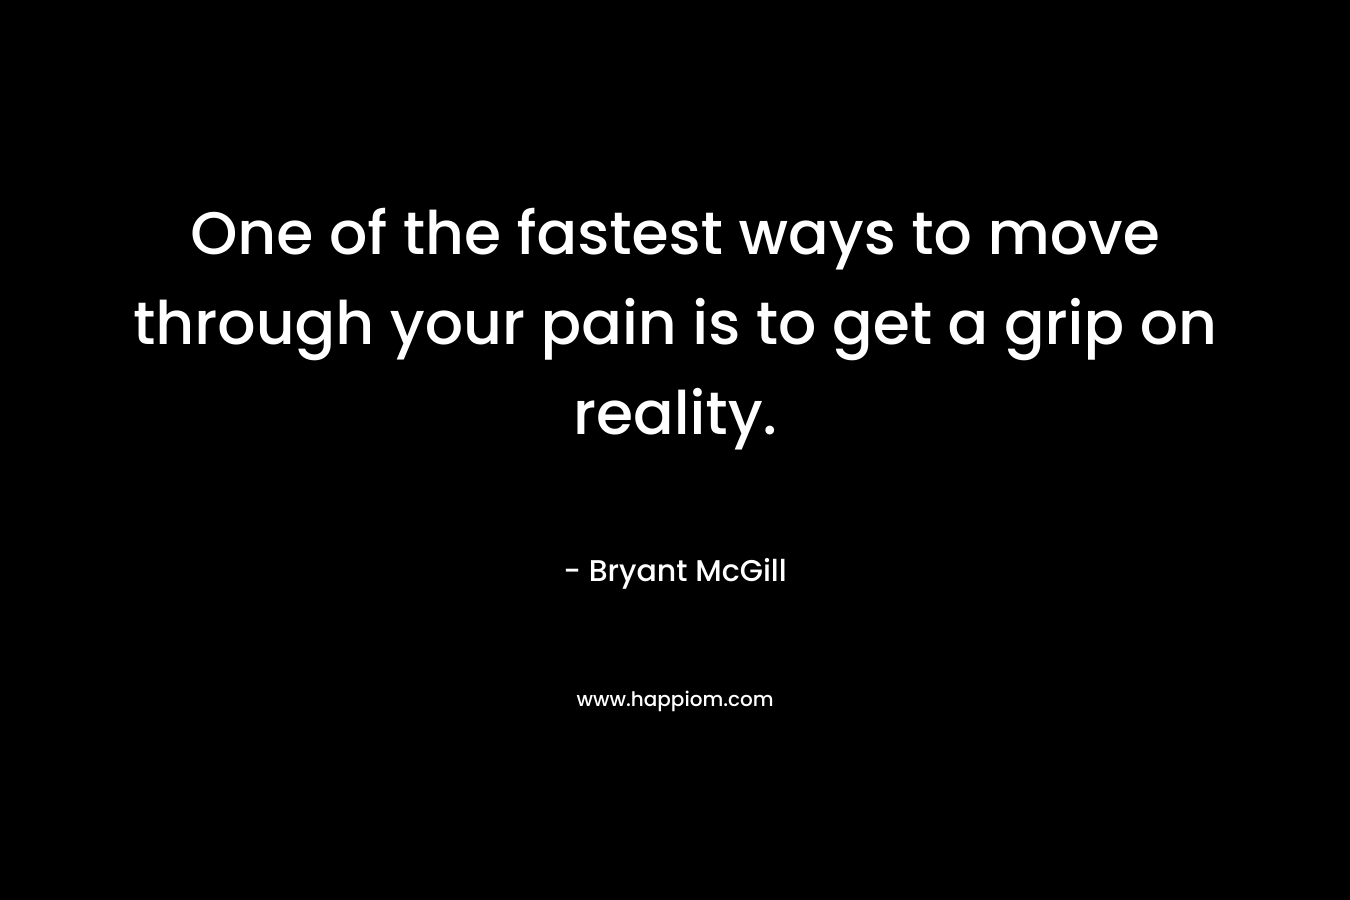 One of the fastest ways to move through your pain is to get a grip on reality. – Bryant McGill